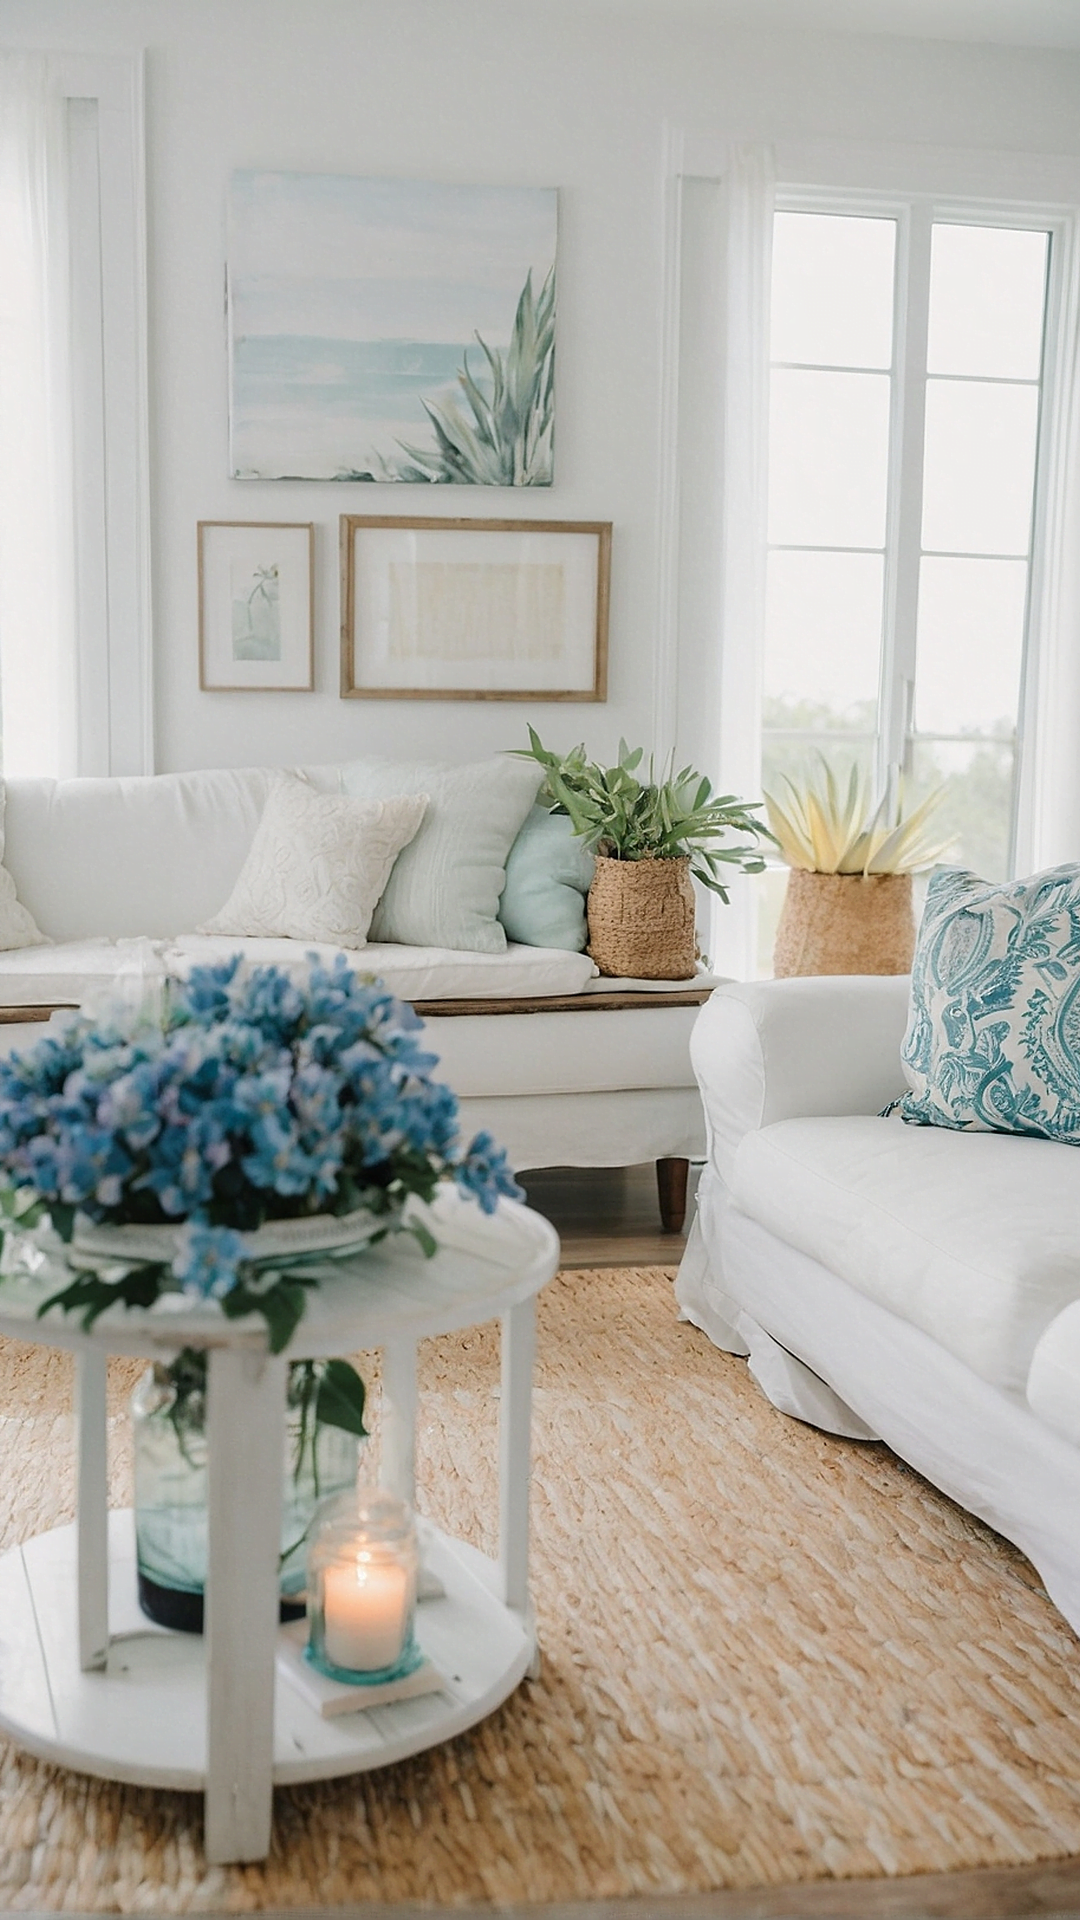 Relaxation Station: Summer Home Decor Essentials